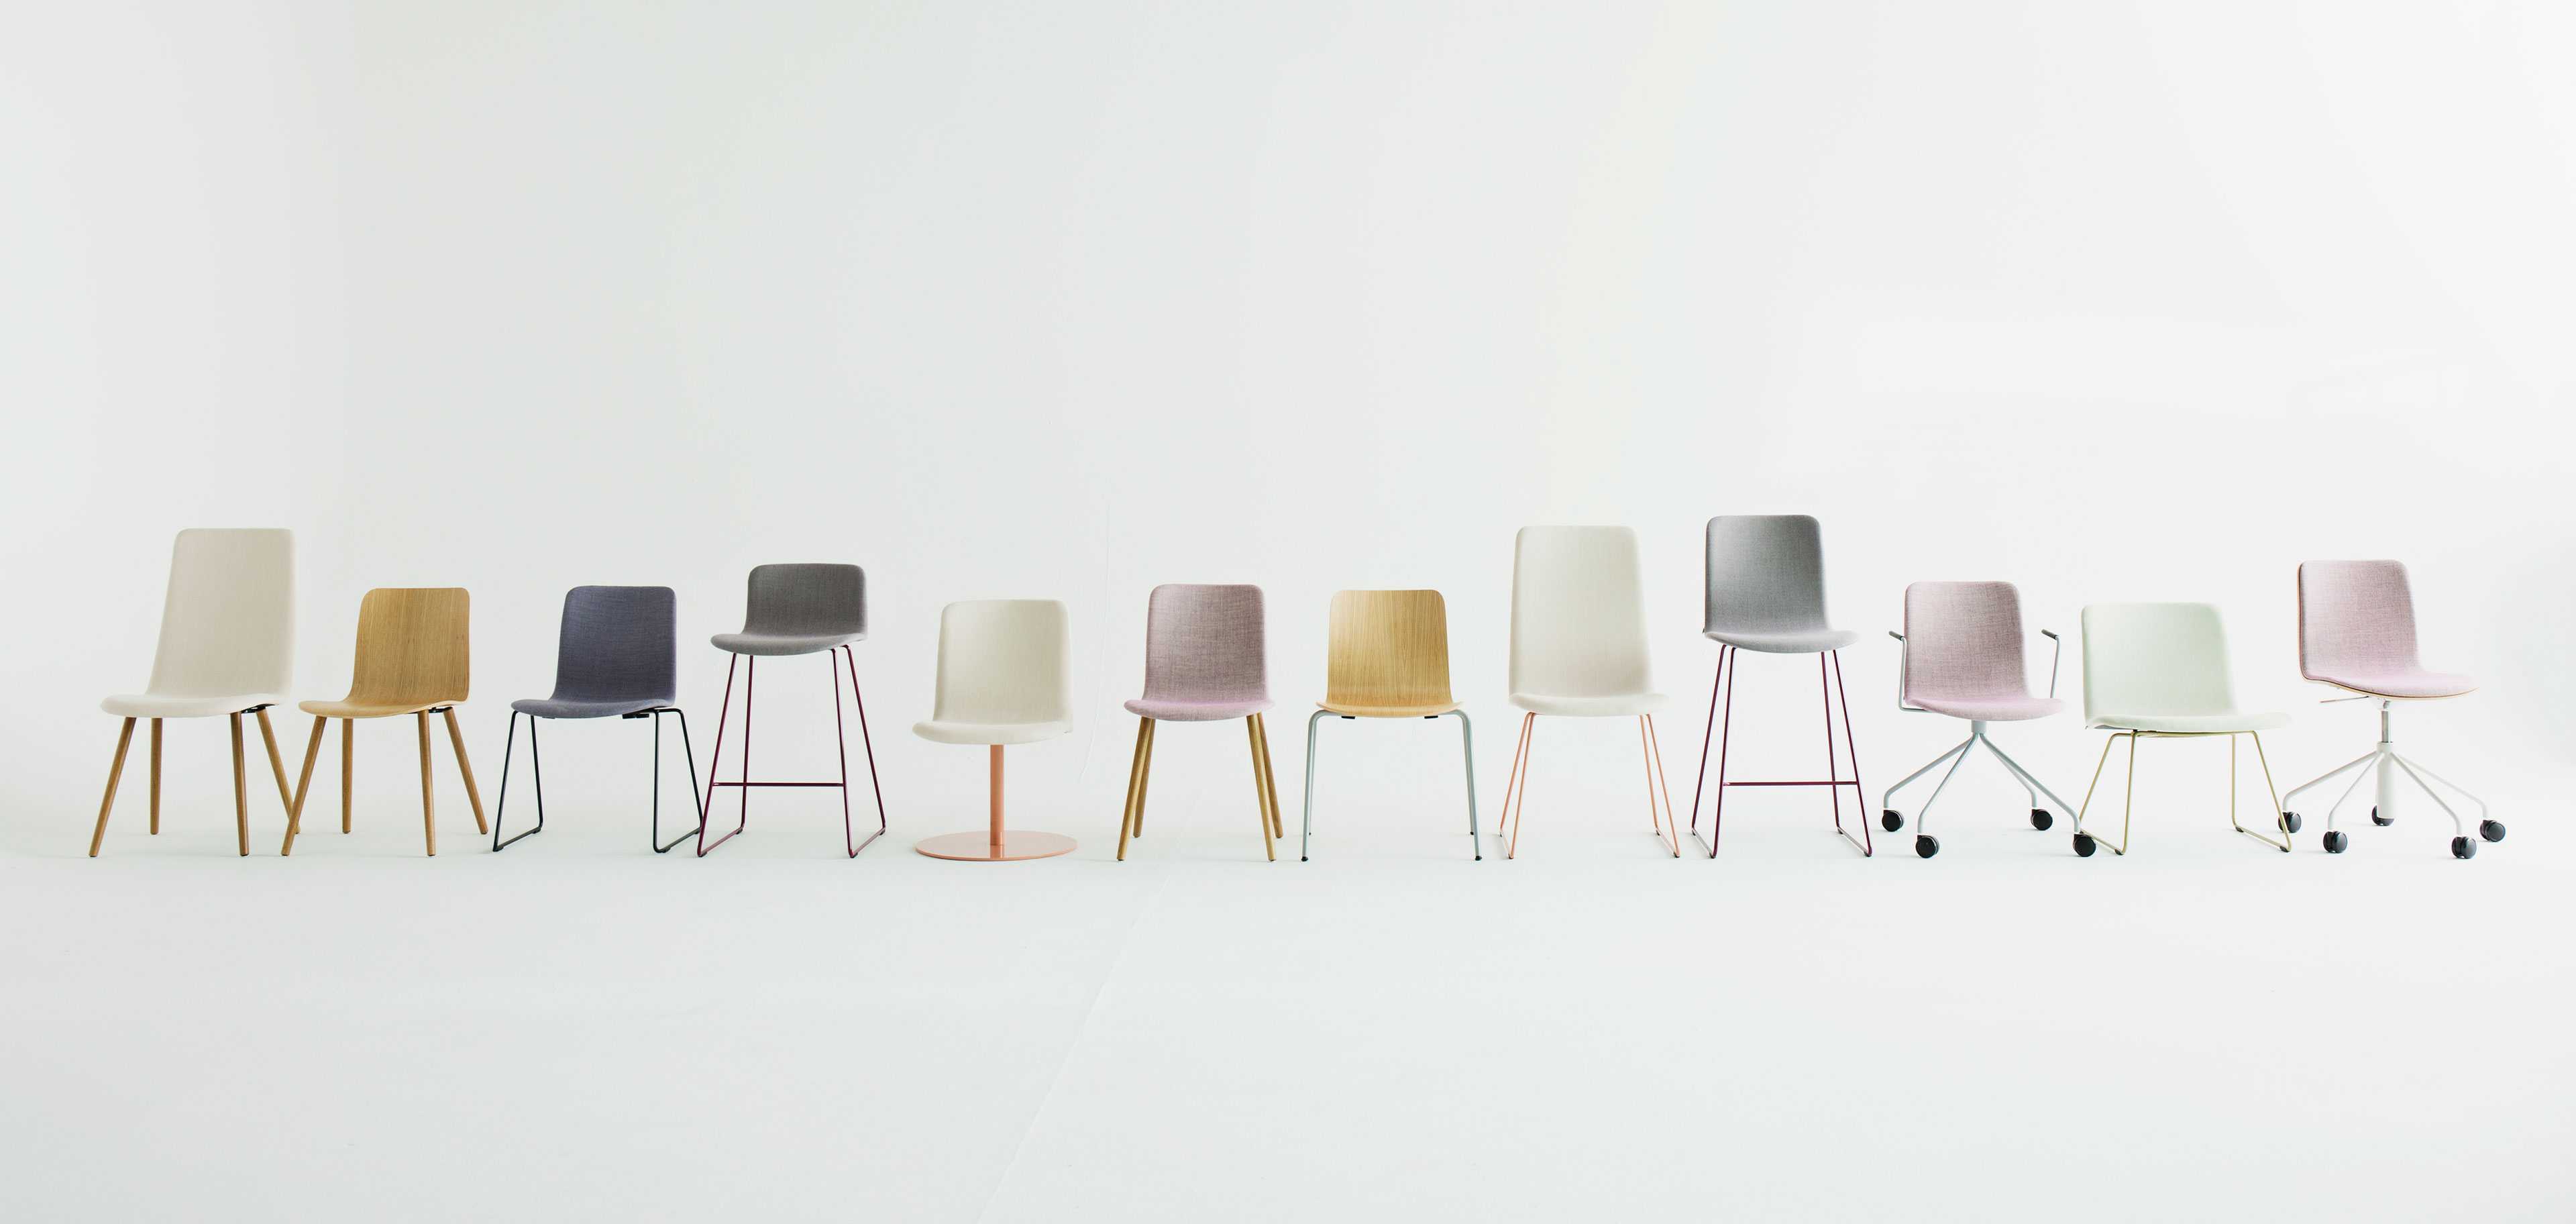 Sola chairs by Martela